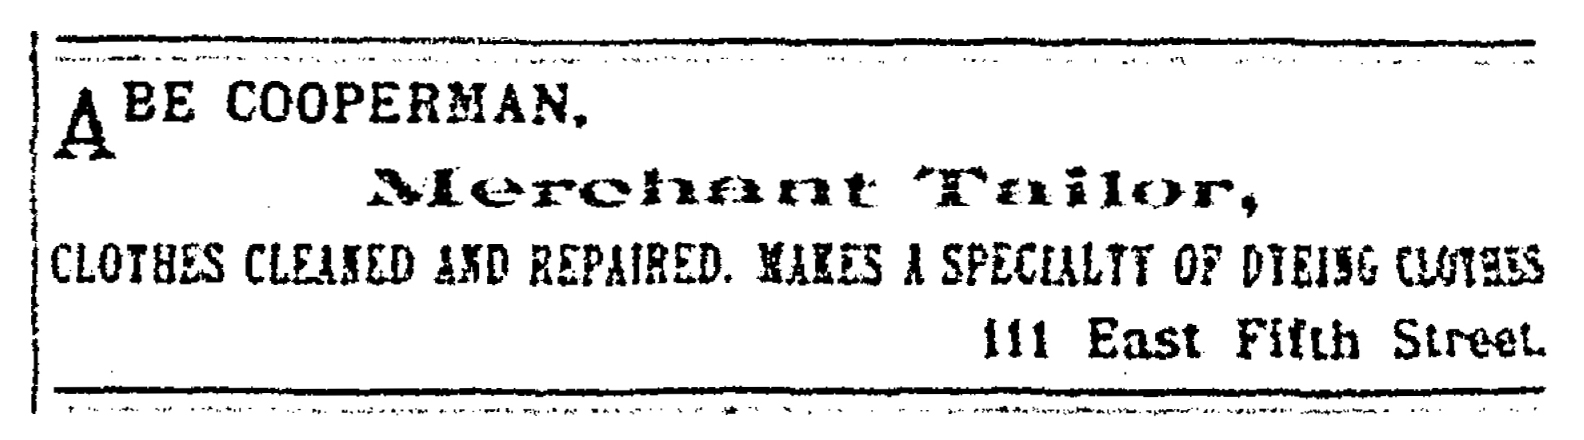 Leadville Evening Chronicle, July 12, 1890